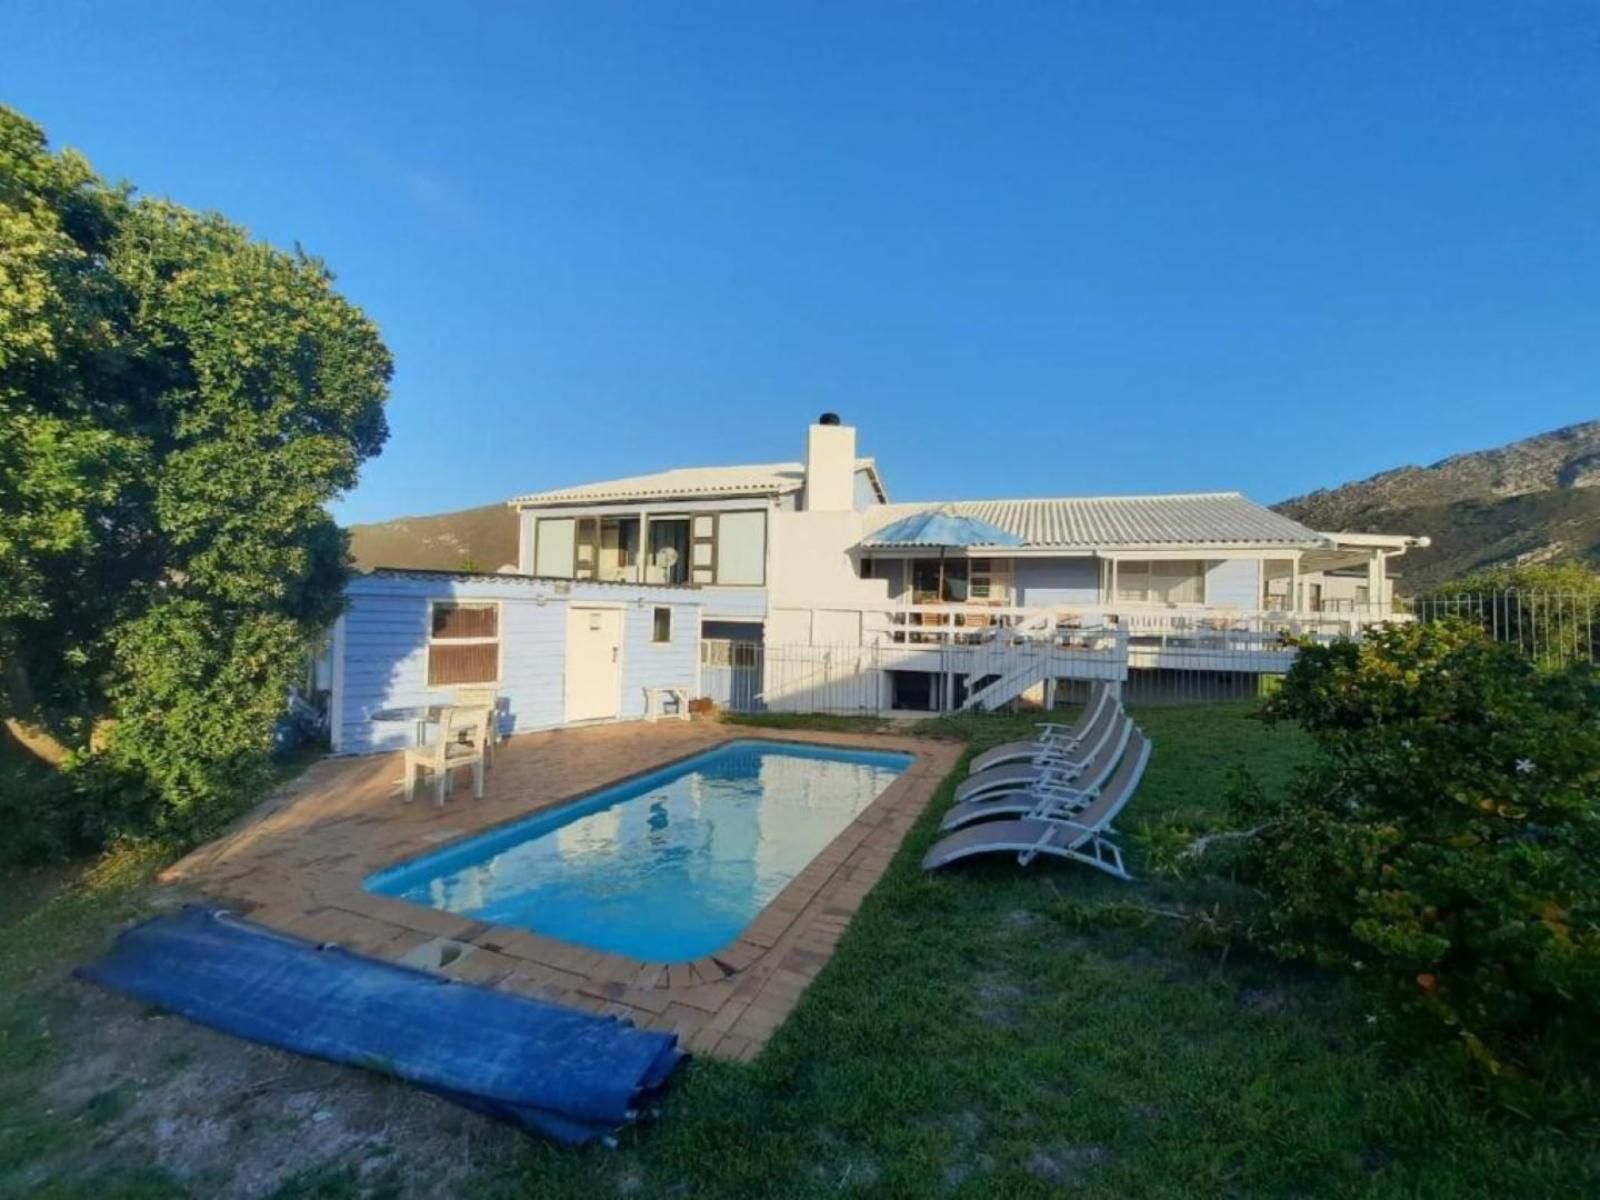 Mermaid S Tail Pringle Bay Pringle Bay Western Cape South Africa House, Building, Architecture, Swimming Pool